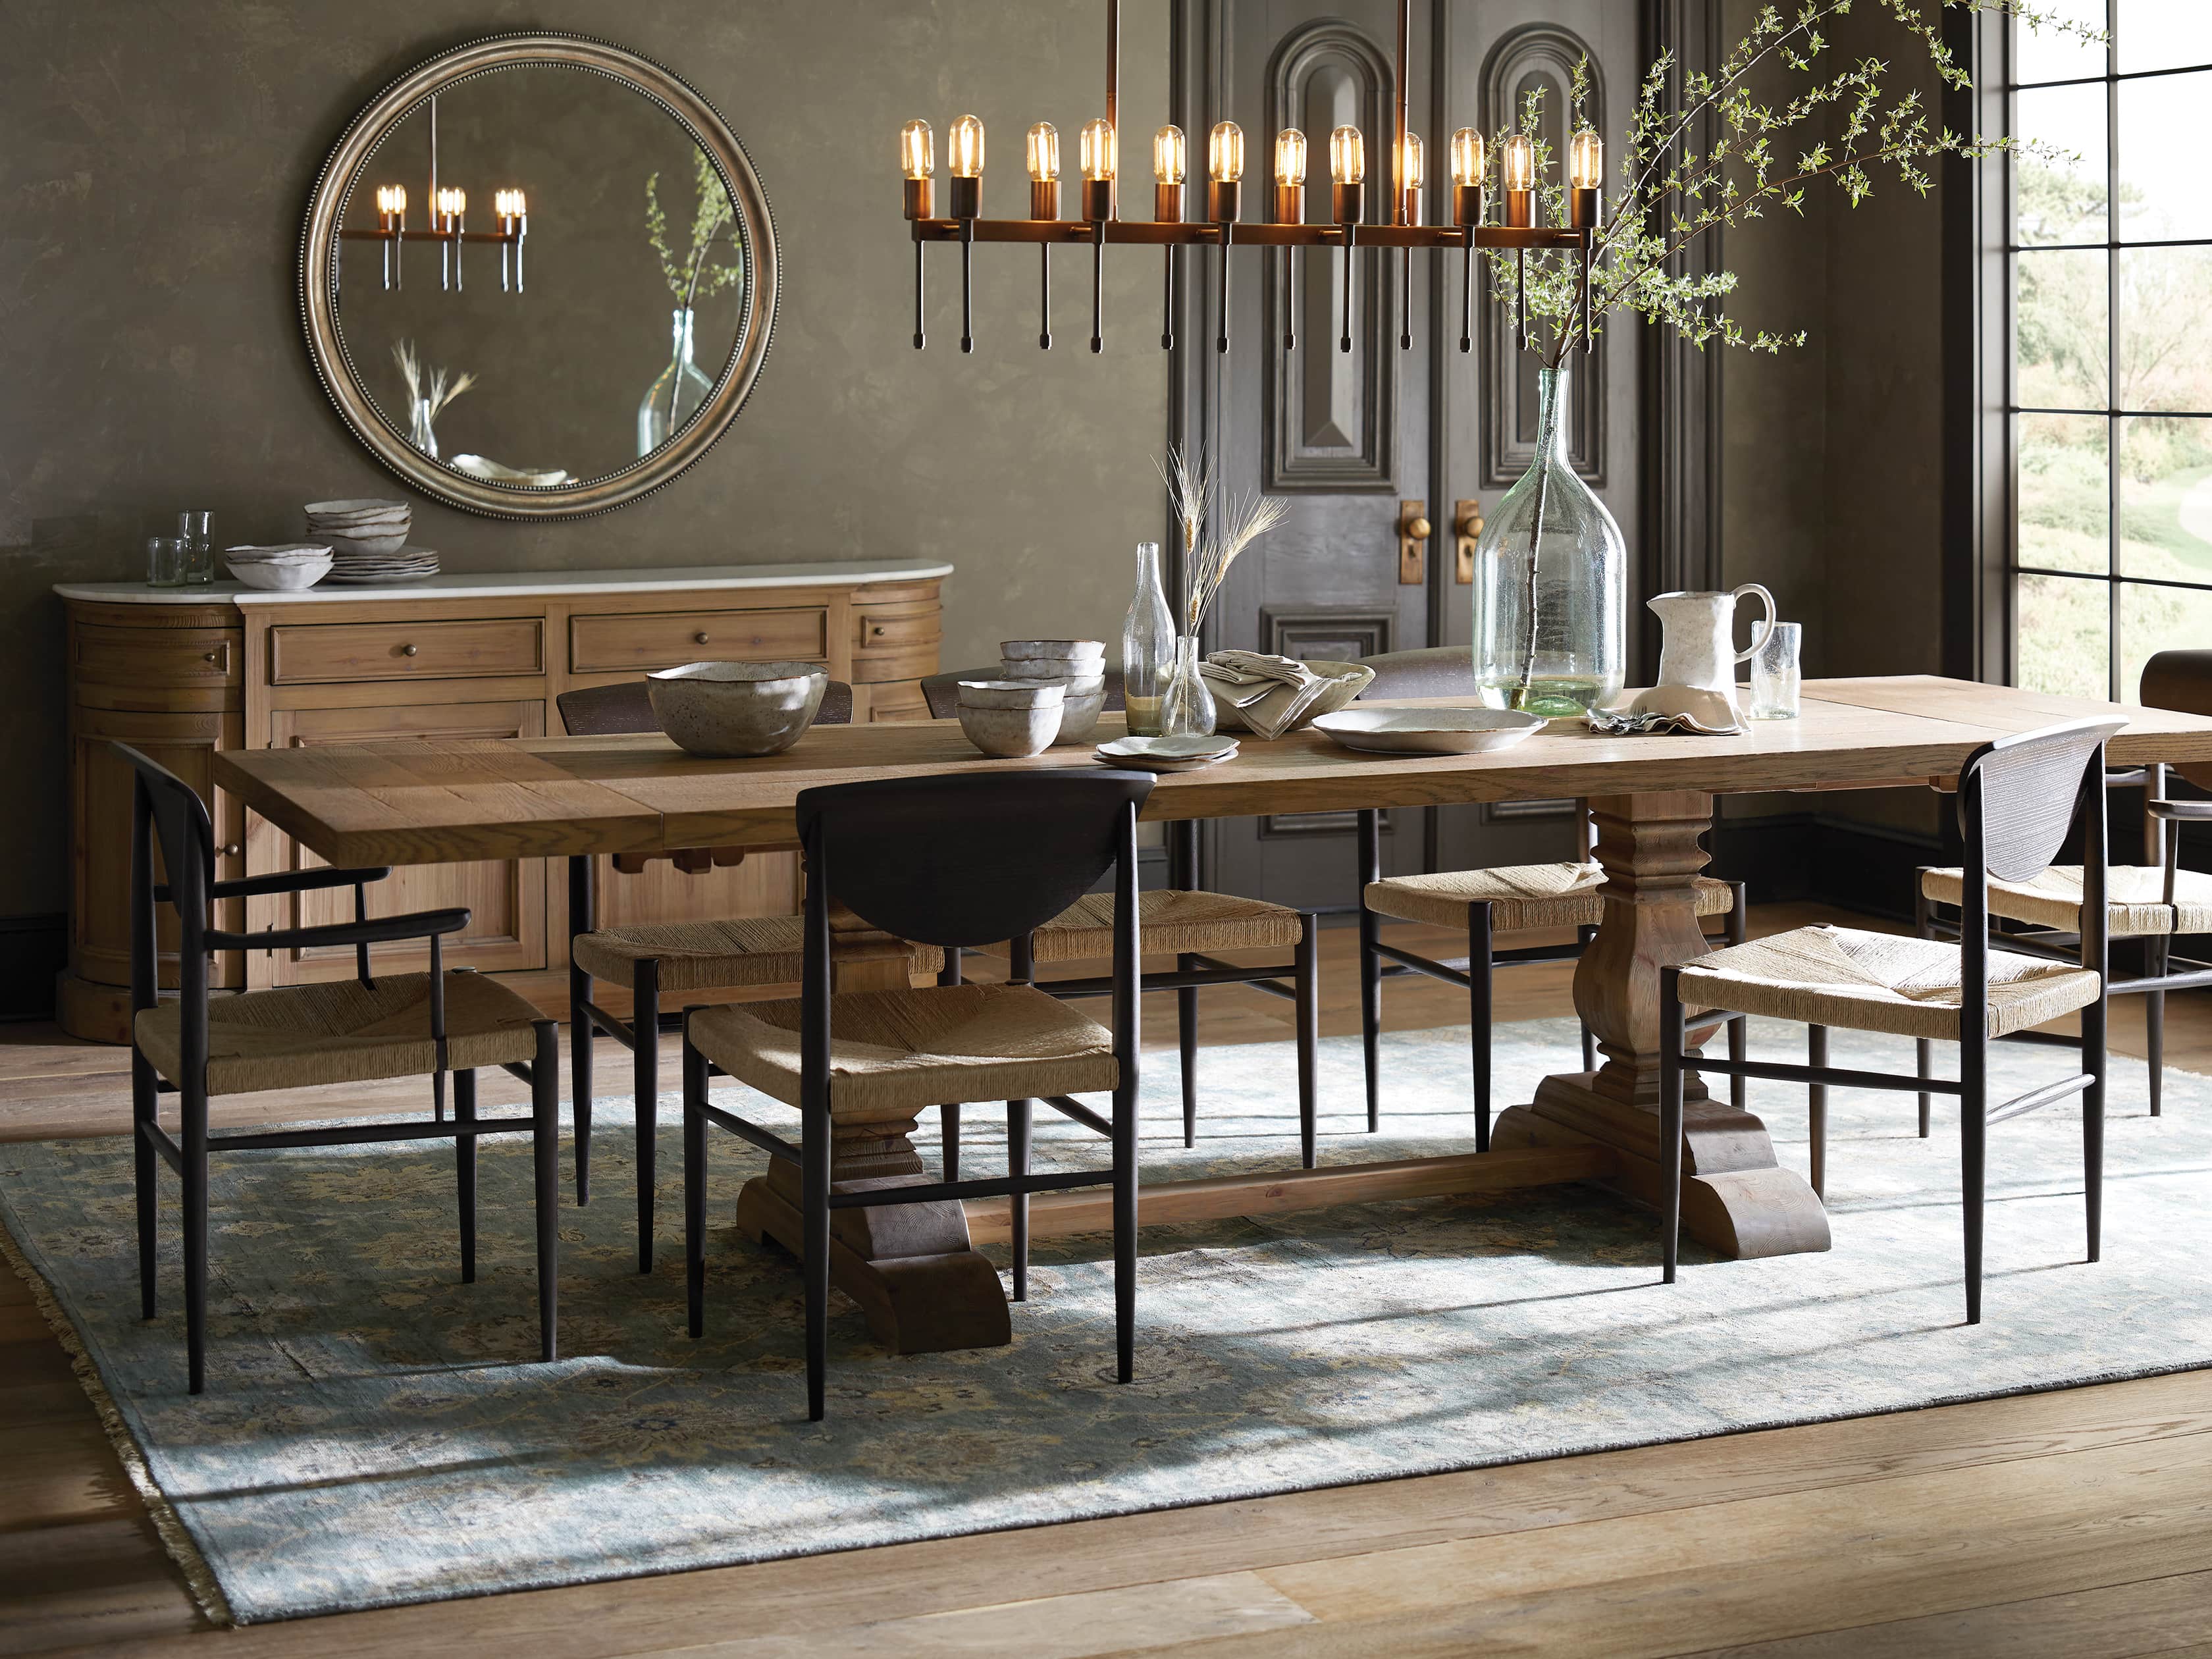 View the Kensington Dining Table